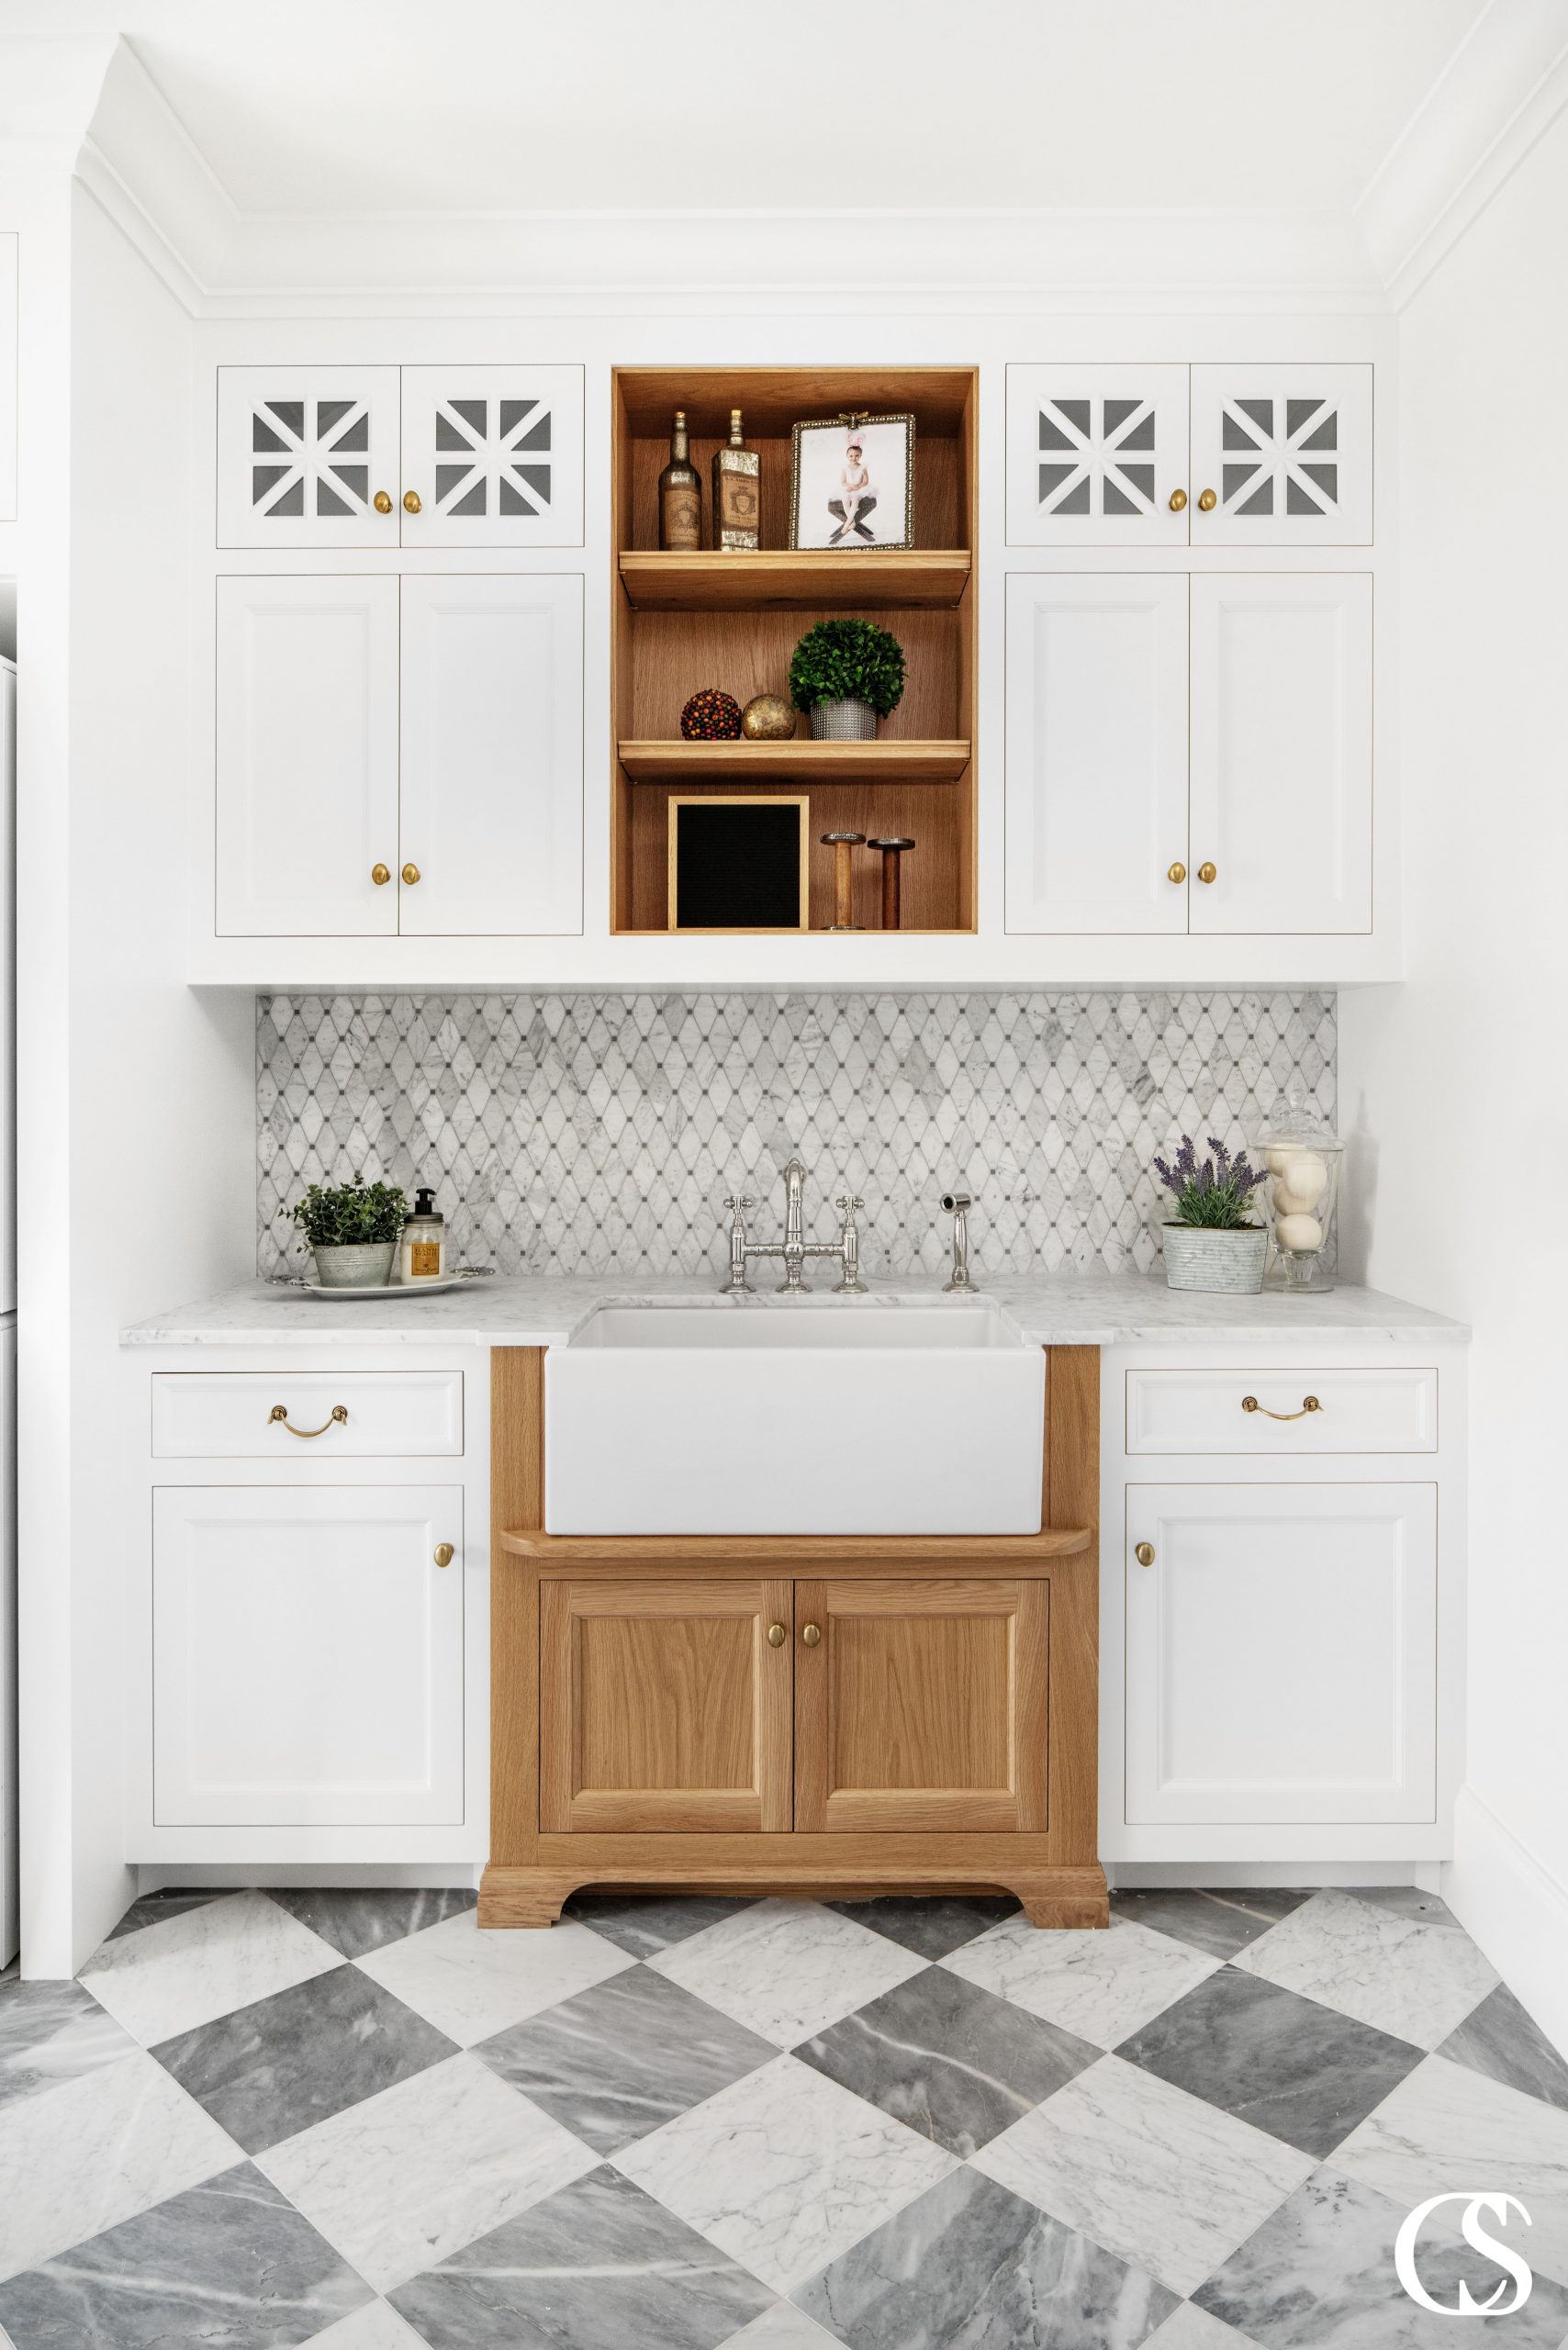 Every one of the symmetrical, angular patterns in this unique design idea for the cabinets makes it perfectly unique and worth standing over the sink for.unique design ideas for cabinets